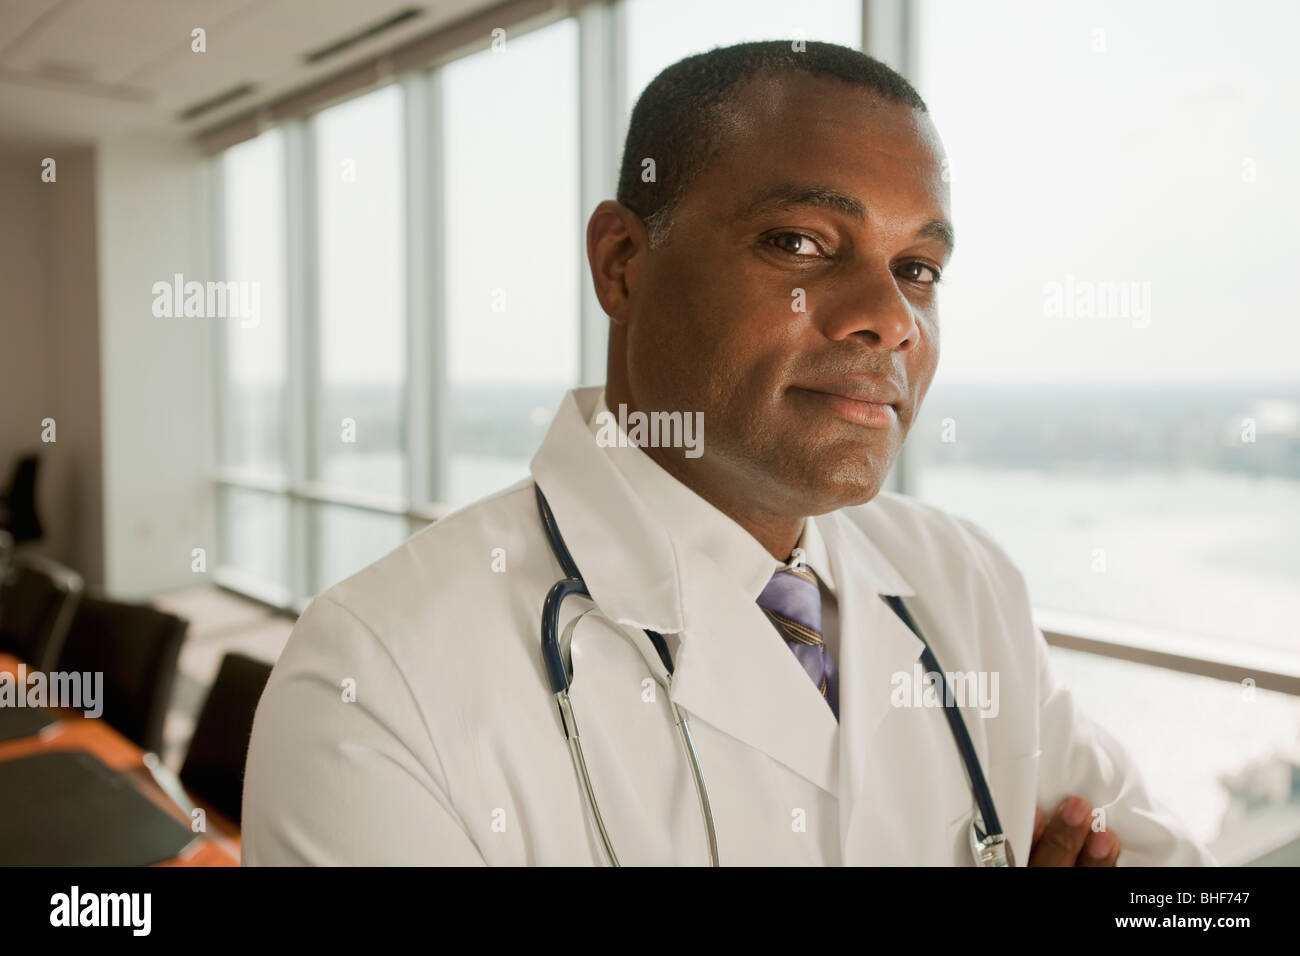 African American doctor in lab coat Banque D'Images